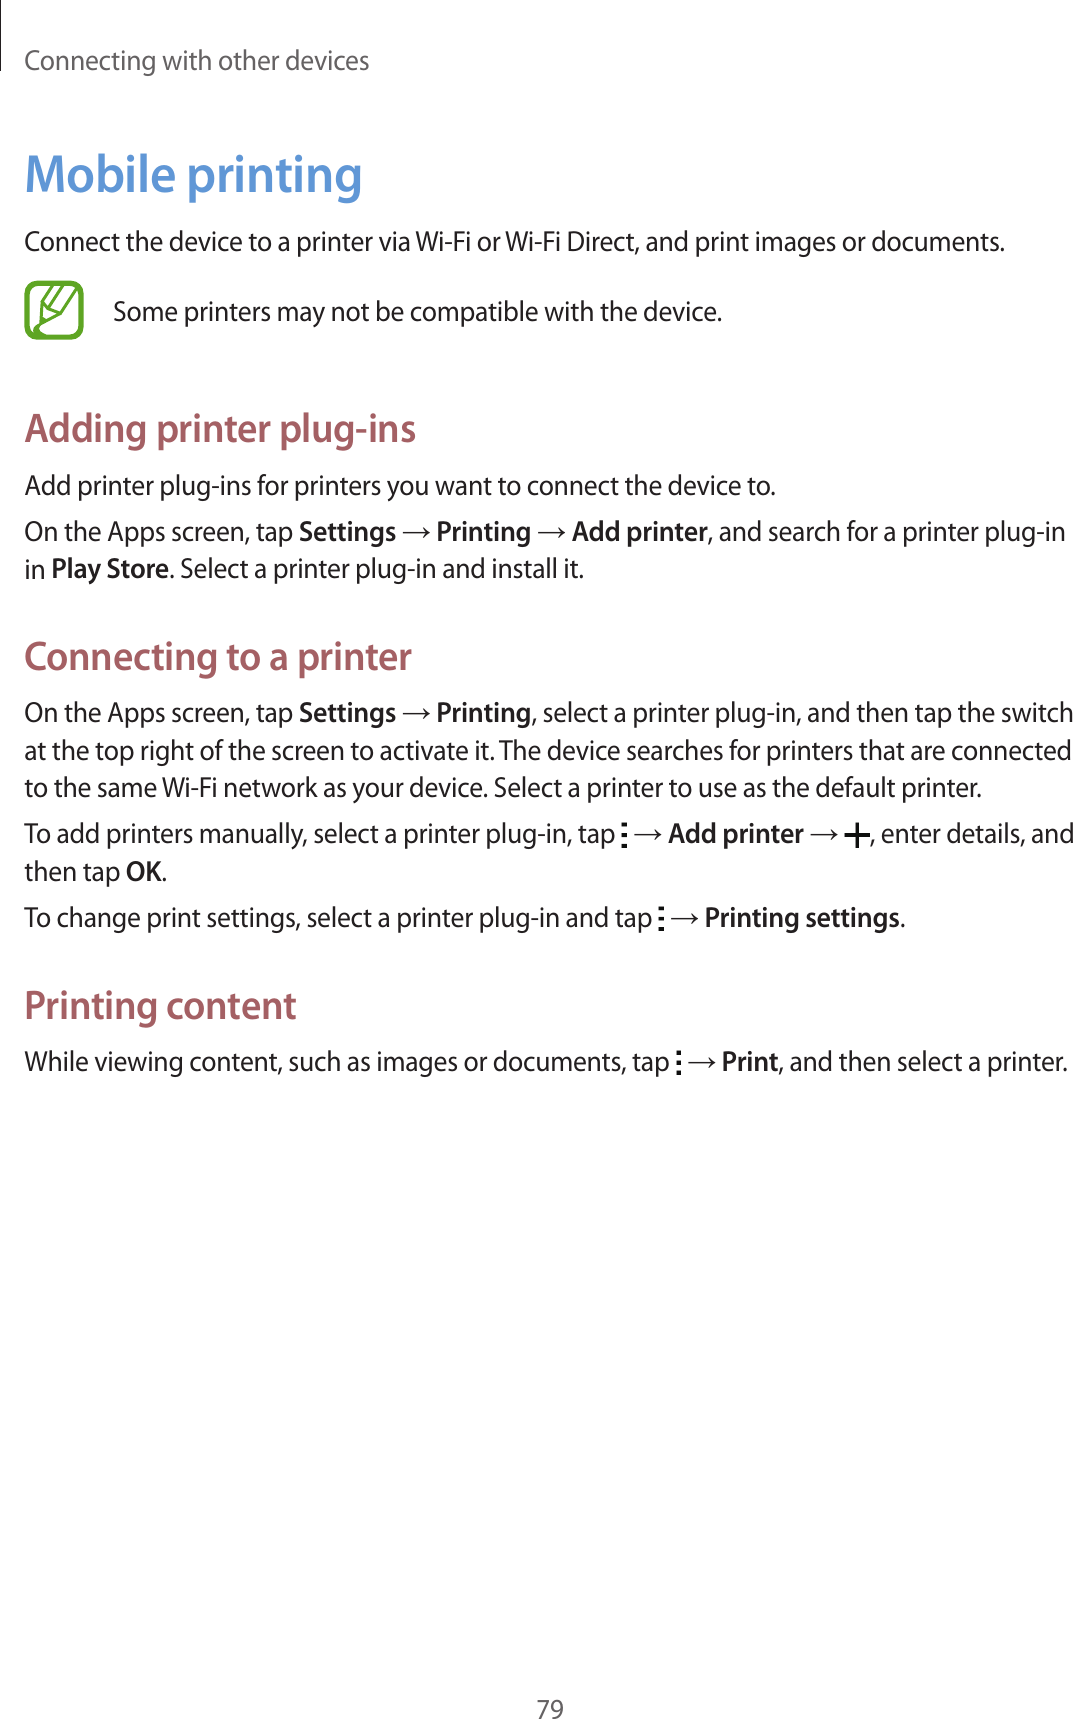 Connecting with other devices79Mobile printingConnect the device to a printer via Wi-Fi or Wi-Fi Direct, and print images or documents.Some printers may not be compatible with the device.Adding printer plug-insAdd printer plug-ins for printers you want to connect the device to.On the Apps screen, tap Settings → Printing → Add printer, and search for a printer plug-in in Play Store. Select a printer plug-in and install it.Connecting to a printerOn the Apps screen, tap Settings → Printing, select a printer plug-in, and then tap the switch at the top right of the screen to activate it. The device searches for printers that are connected to the same Wi-Fi network as your device. Select a printer to use as the default printer.To add printers manually, select a printer plug-in, tap   → Add printer → , enter details, and then tap OK.To change print settings, select a printer plug-in and tap   → Printing settings.Printing contentWhile viewing content, such as images or documents, tap   → Print, and then select a printer.